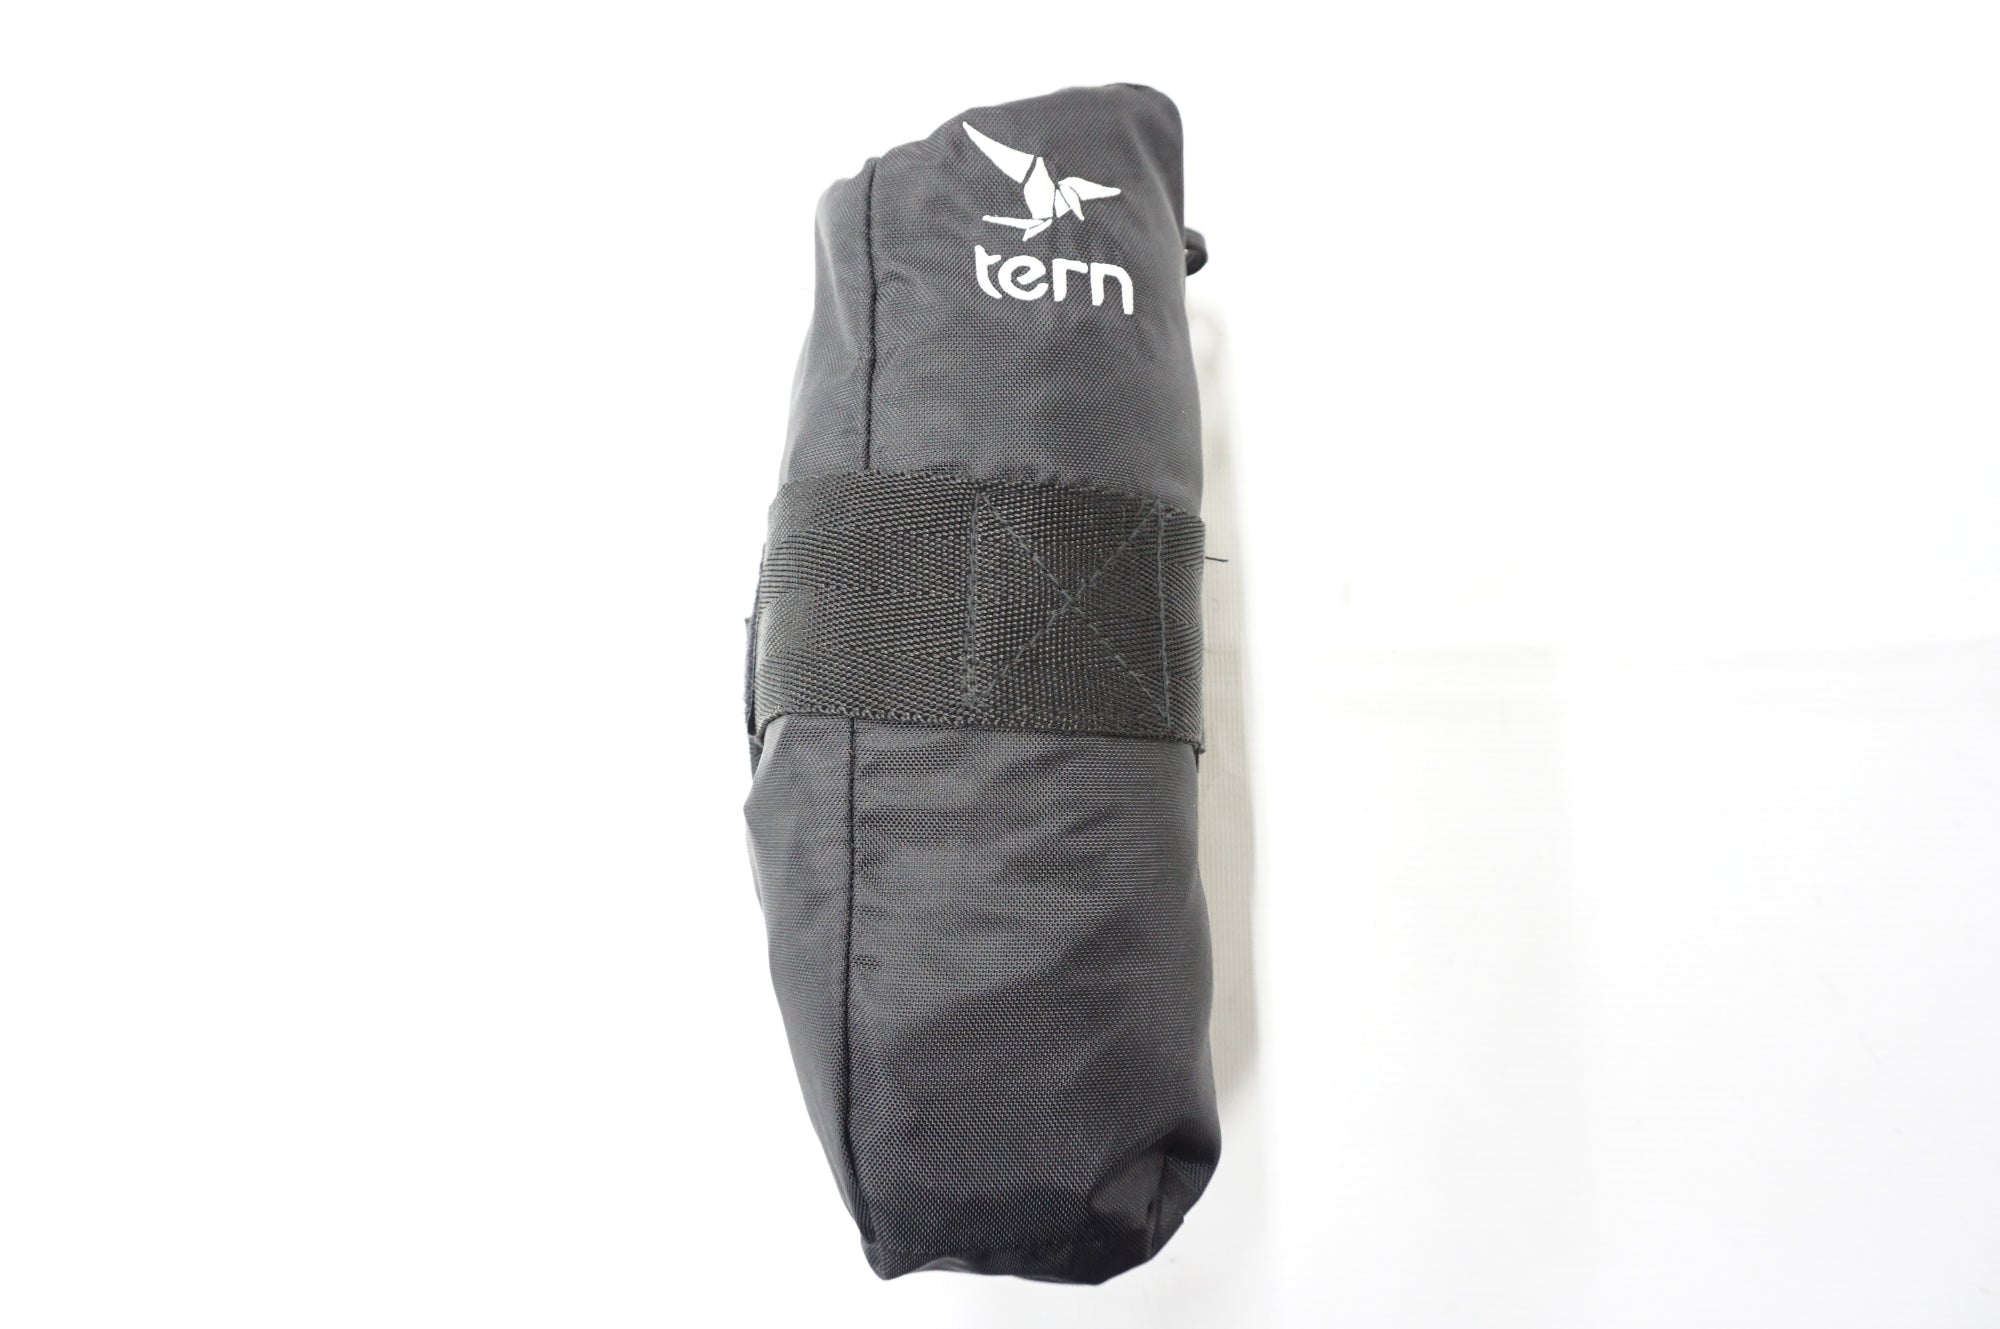 TERN 「ターン」 CarryOn Cover 2.0 輪行バッグ / 阪急塚口店